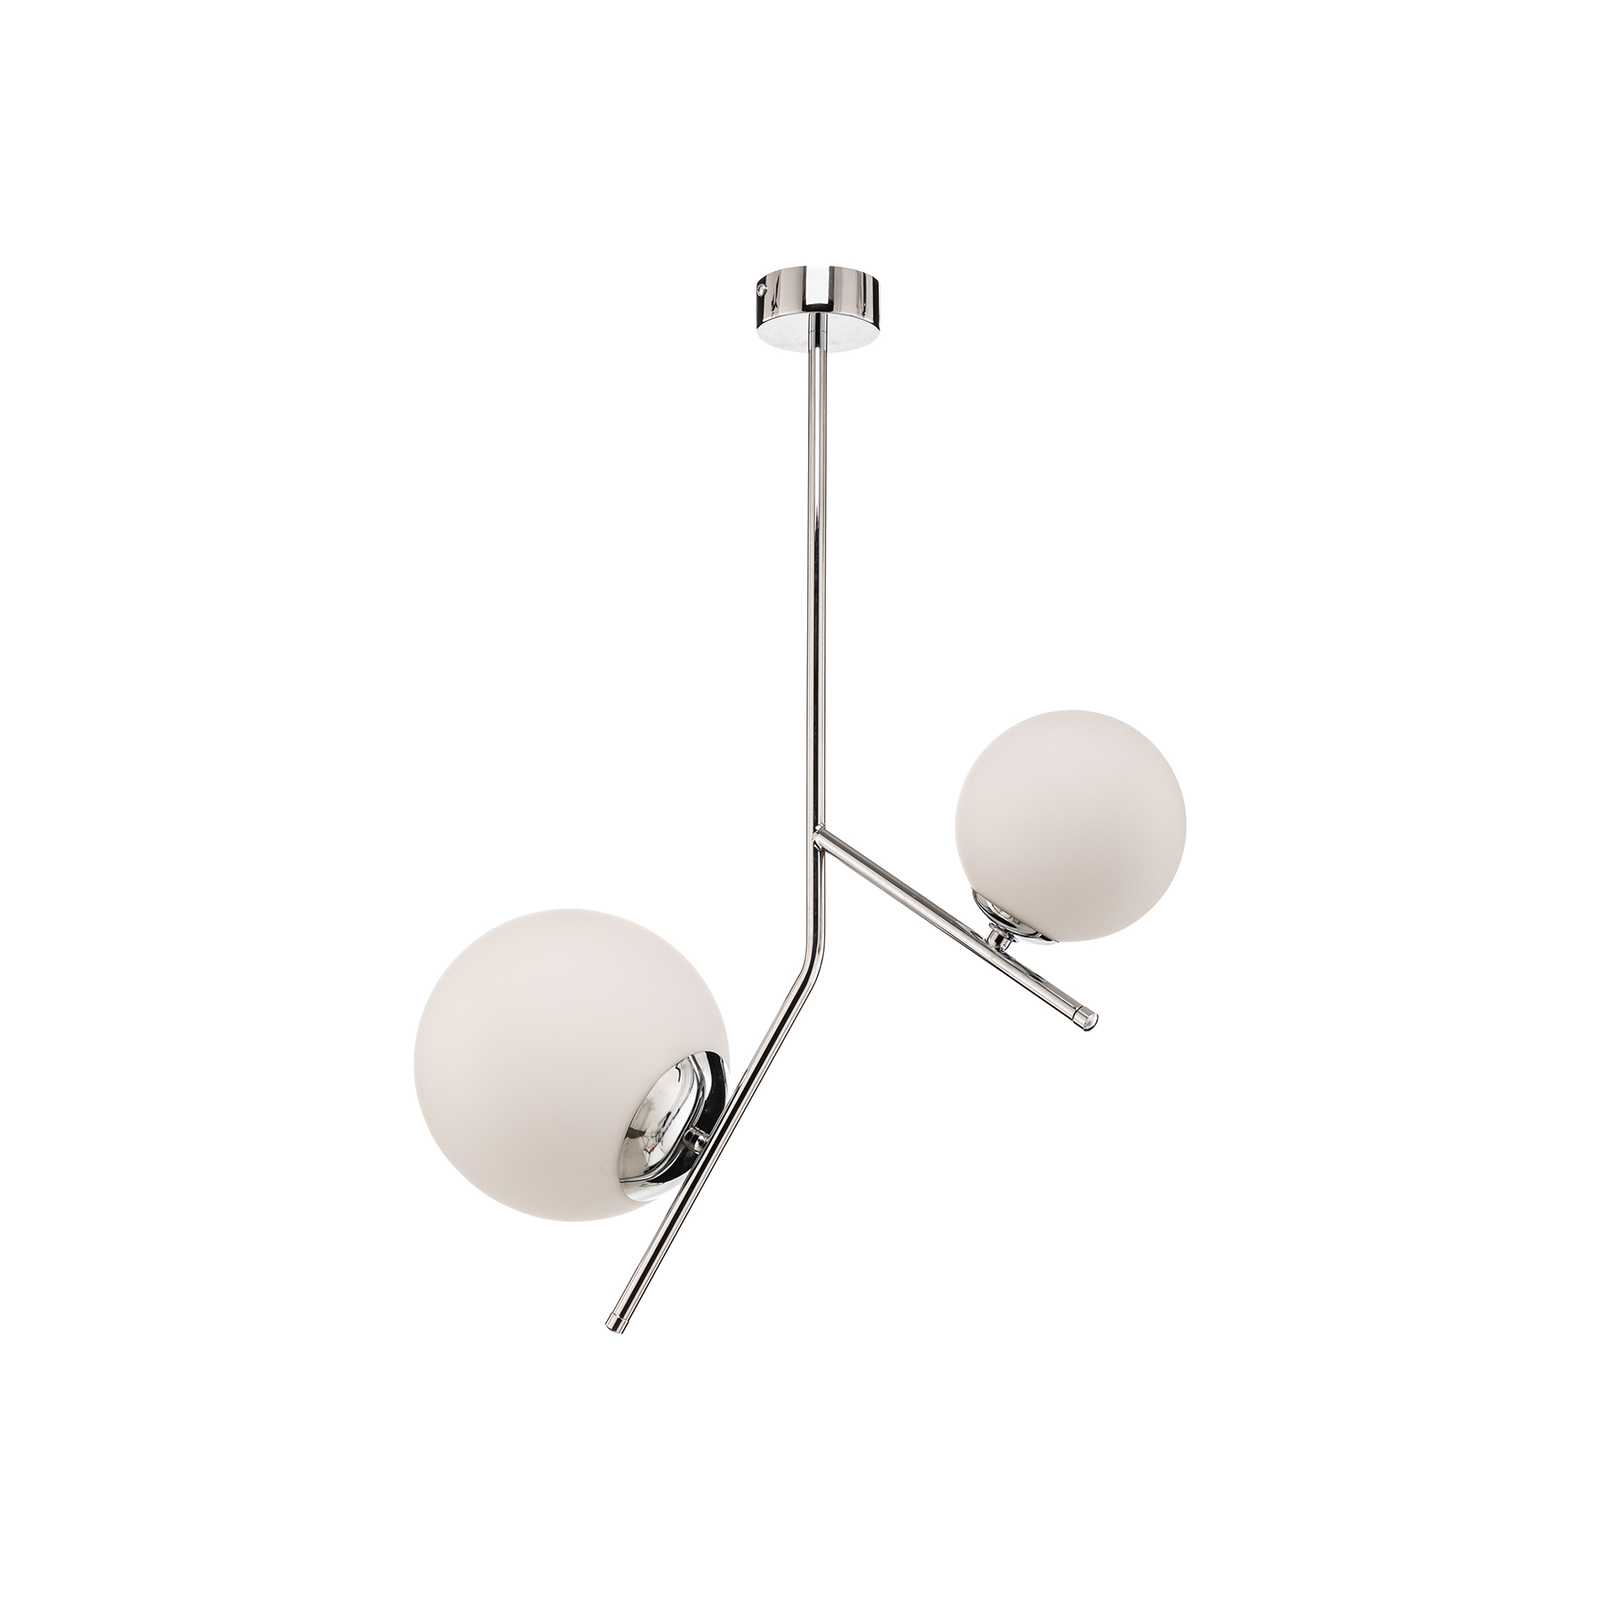 Lunio hanging lamp, two-bulb, chrome